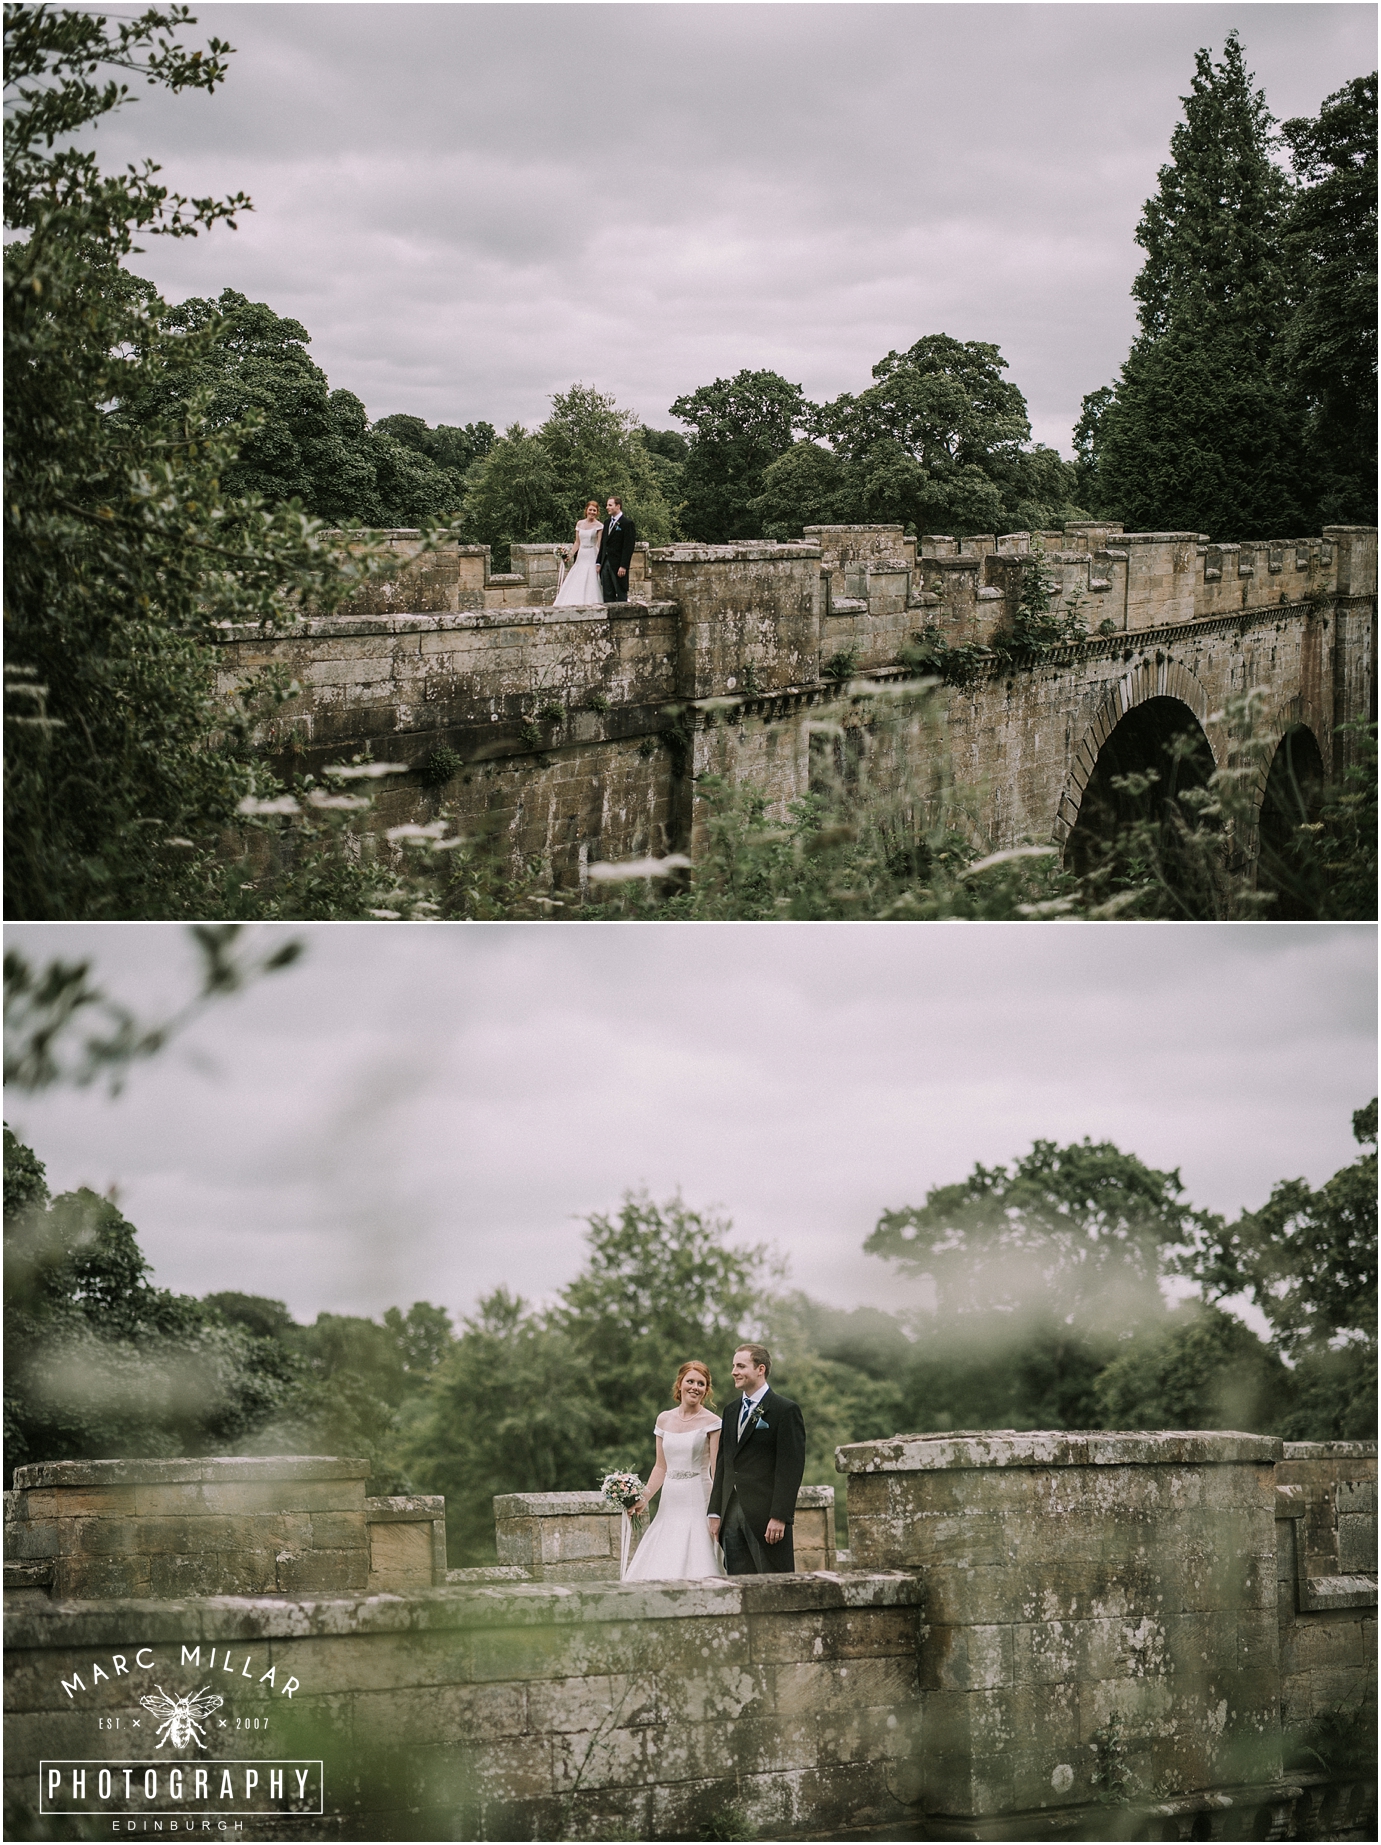  Oxenfoord Castle Wedding Photography by Marc Millar Photography 